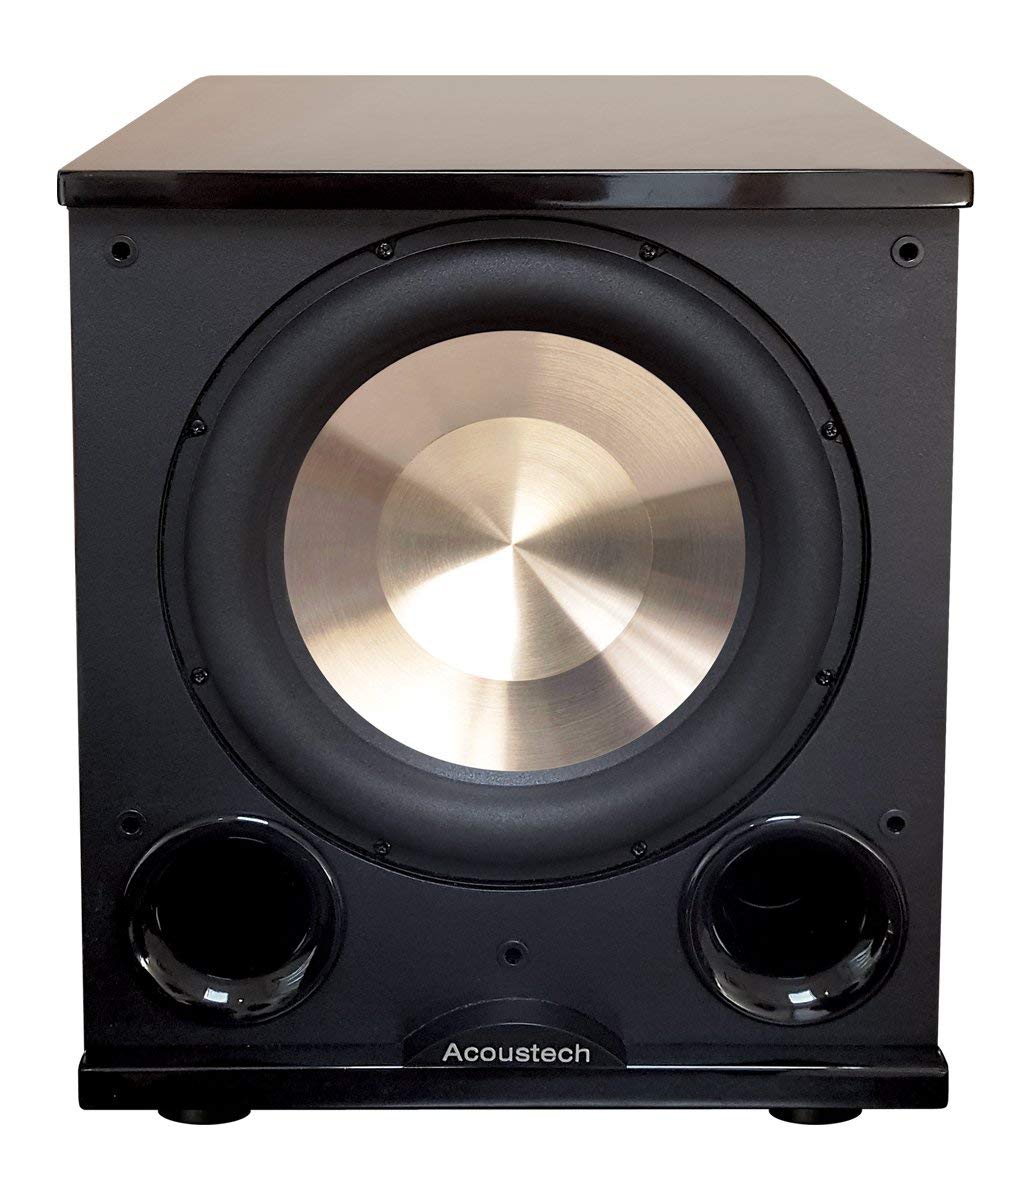 Bic Acoustech PL-200 II Subwoofer (Gloss Black) $249 + Free Shipping